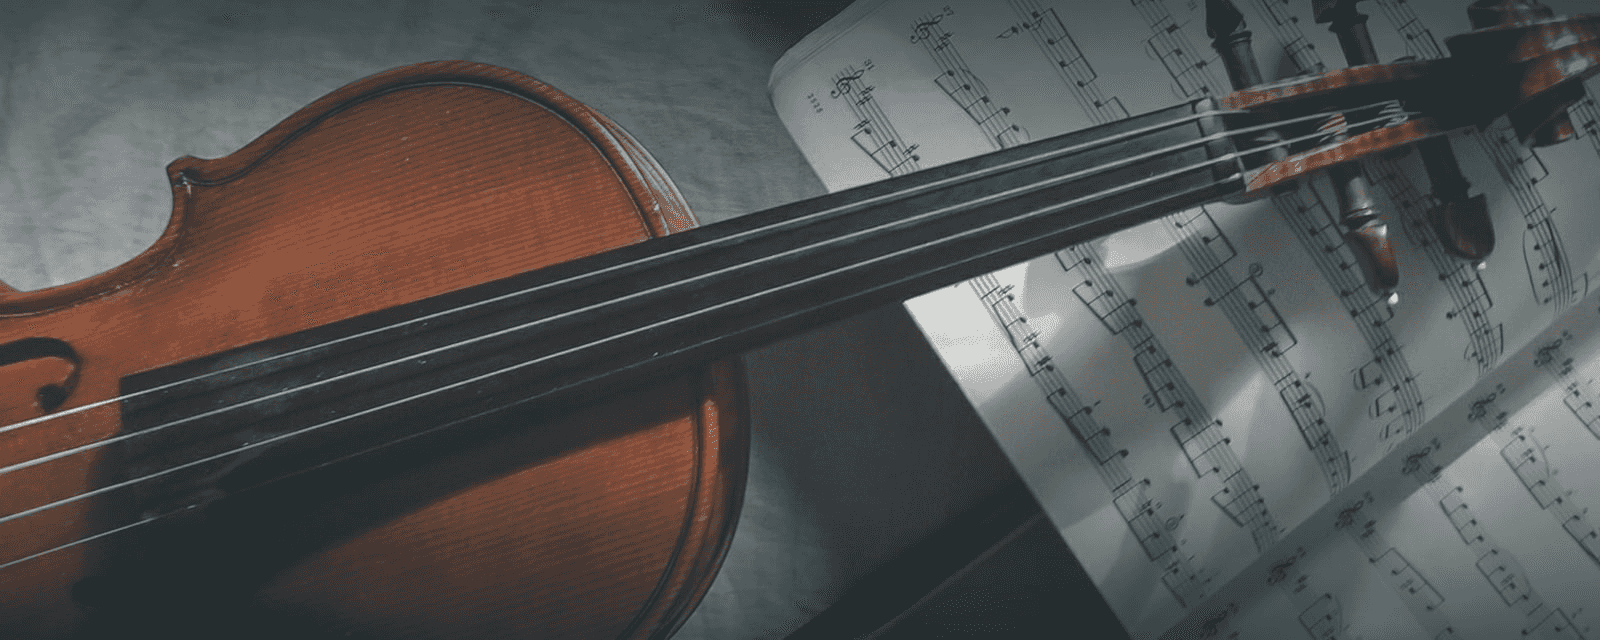 Violin lessons for beginners and intermediate students